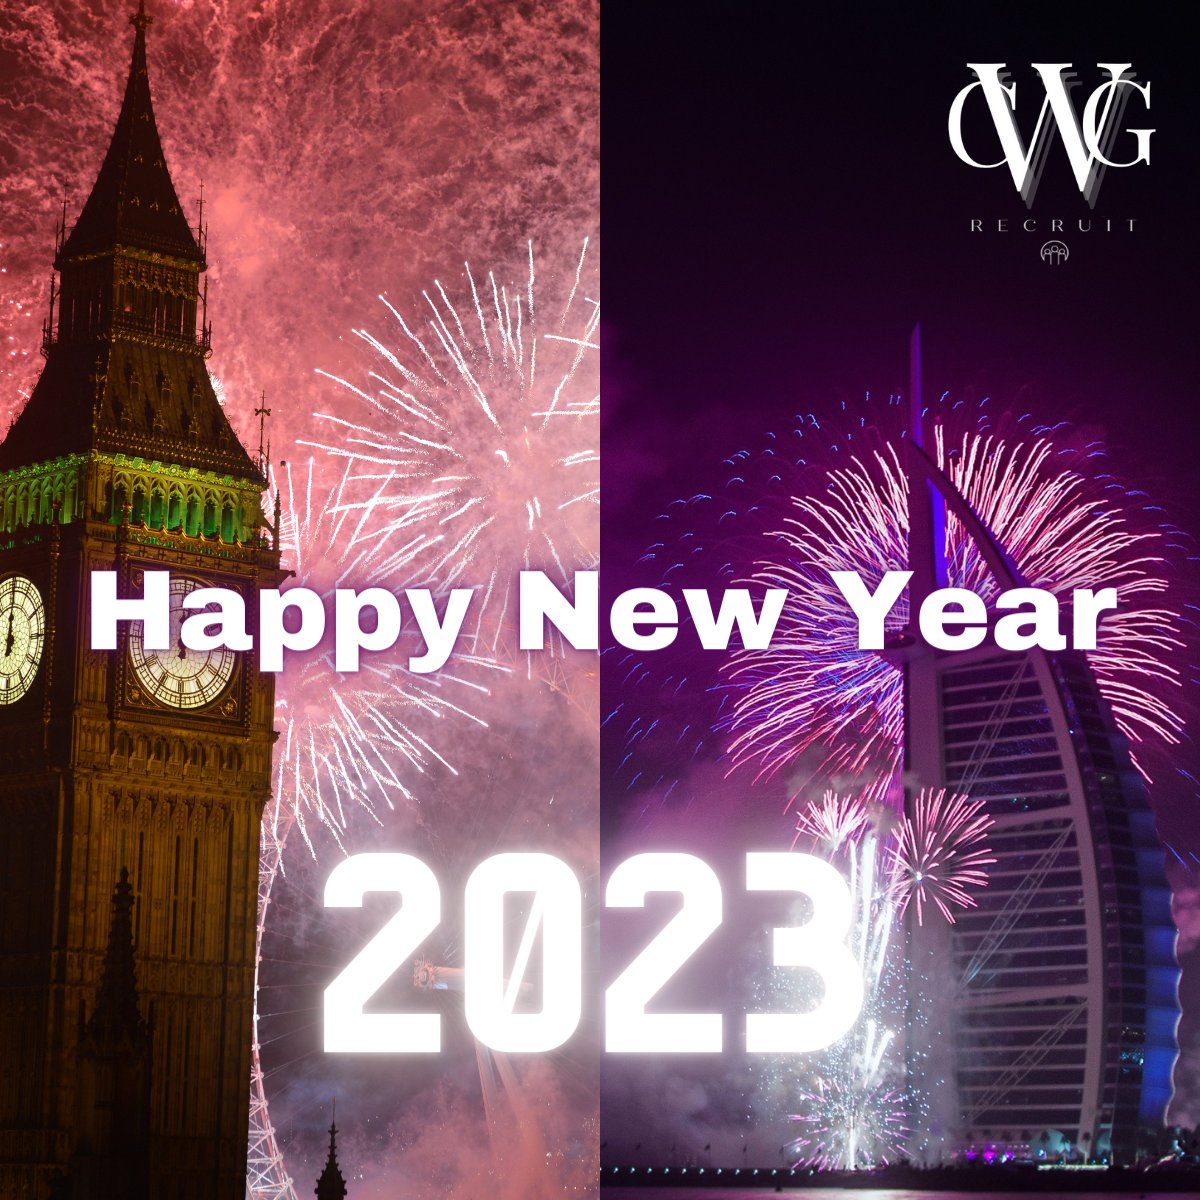 Happy New Year! May you all have a great 2023!

Check out our brand new website:

cwg-recruit.com

#Hiring #Jobs #HiringUAE #Recruiting #CareerOpportunities #UAECareers #ConstructionJobs #FinancialServicesJobs #HealthcareJobs #HospitalityJobs #salesjobs #IT #UK #UKJobs